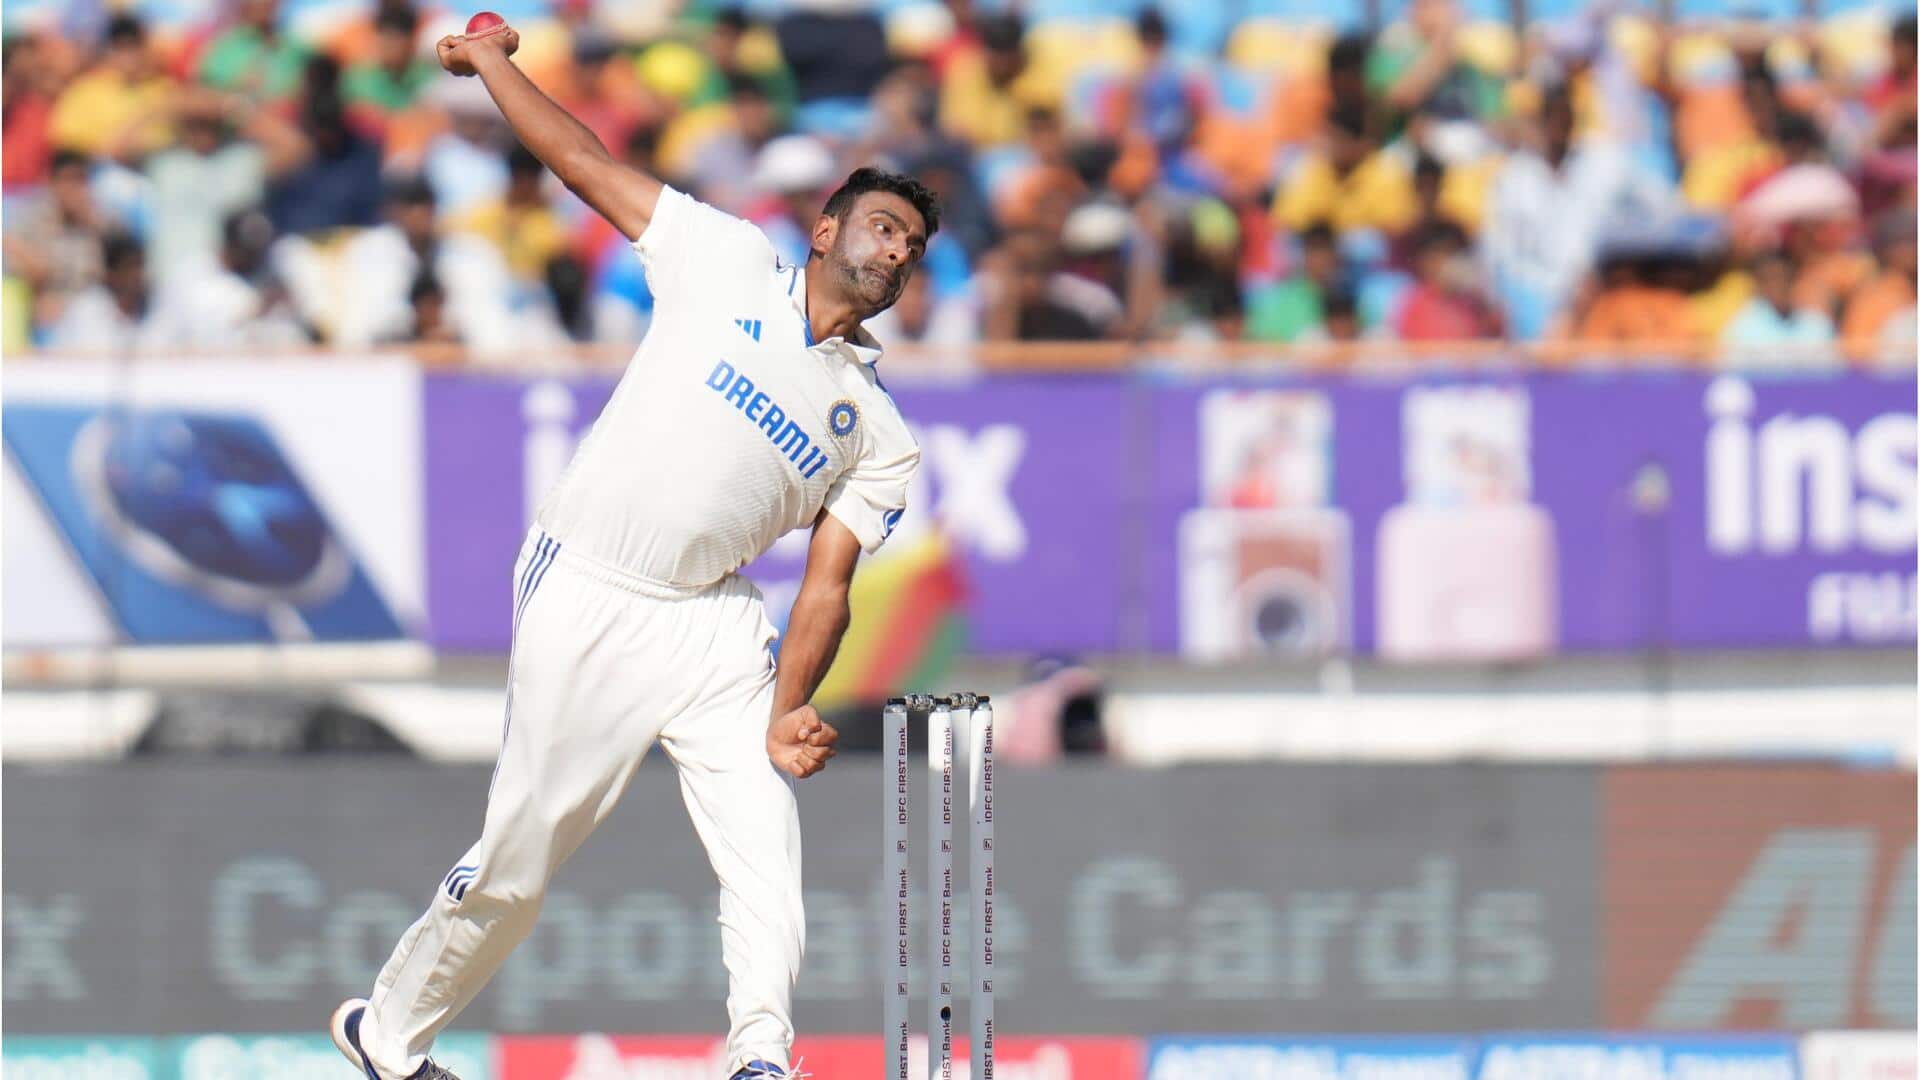 Ravichandran Ashwin surpasses Kumble, becomes highest wicket-taker in India (Tests)